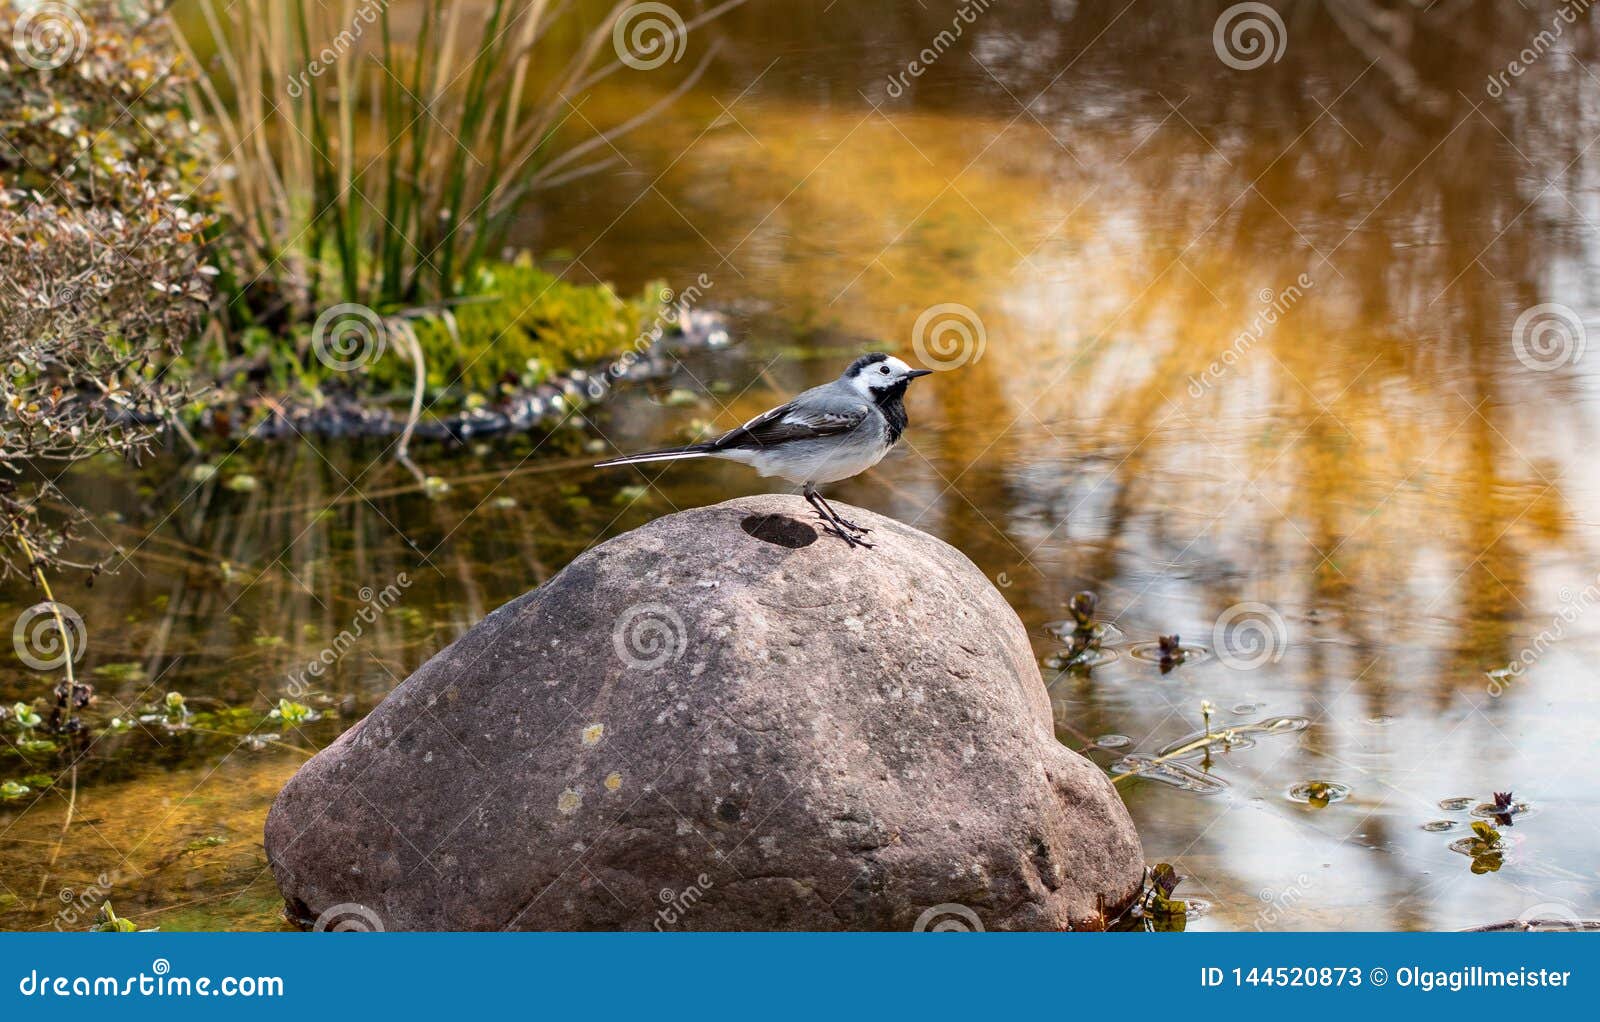 genus of songbirds. a white wagtail on a rock in a shallow river in early spring in germany. the motacilla alba is a small